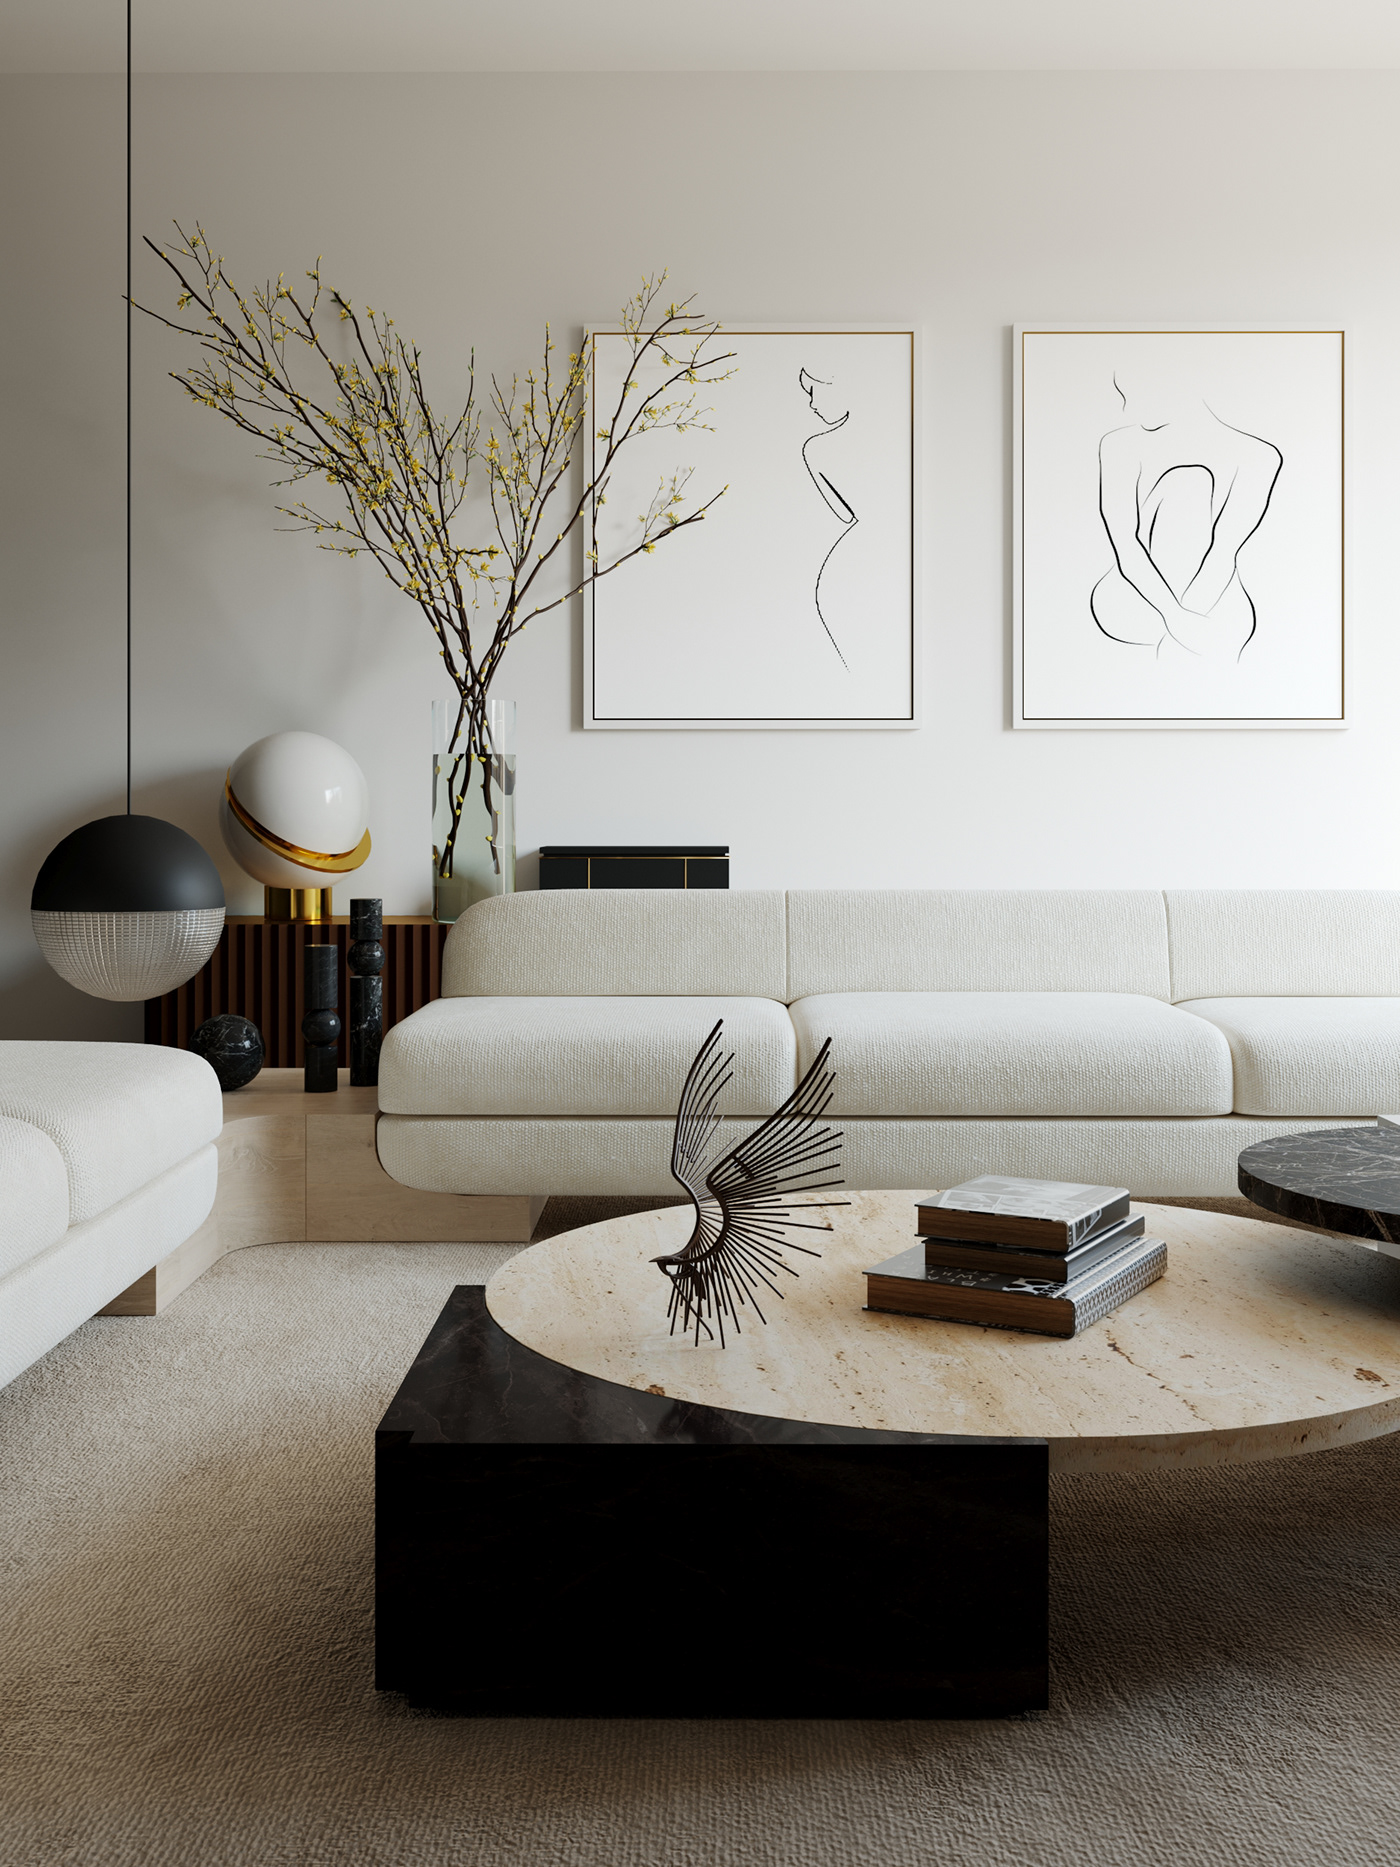 Visualization of a modern interior on Behance